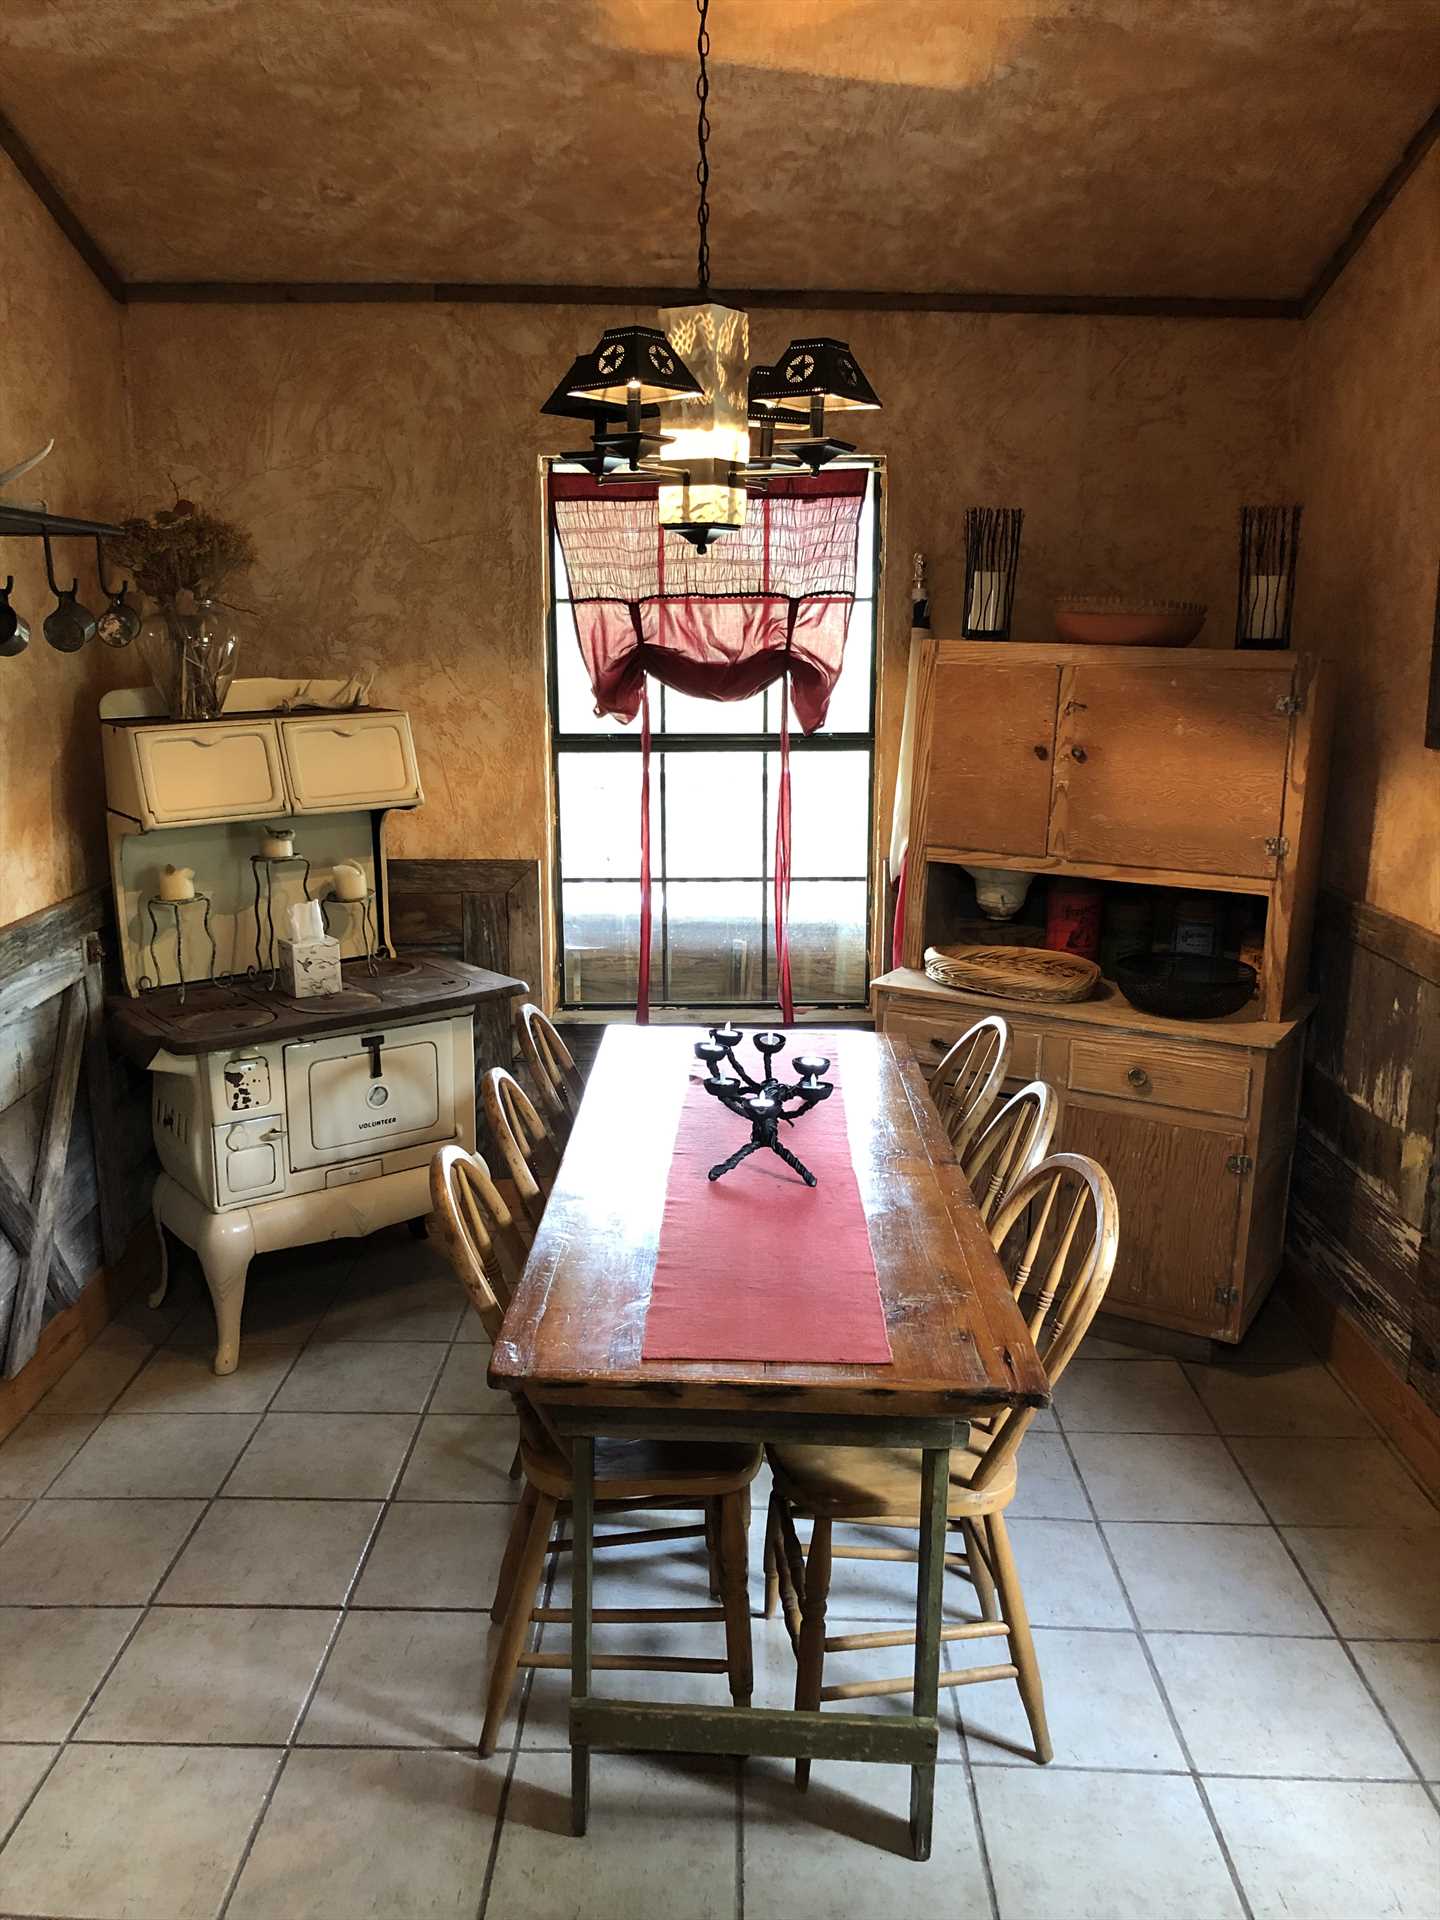                                                 You can almost hear the nostalgic clang of the dinner bell calling you to this wonderful country kitchen!